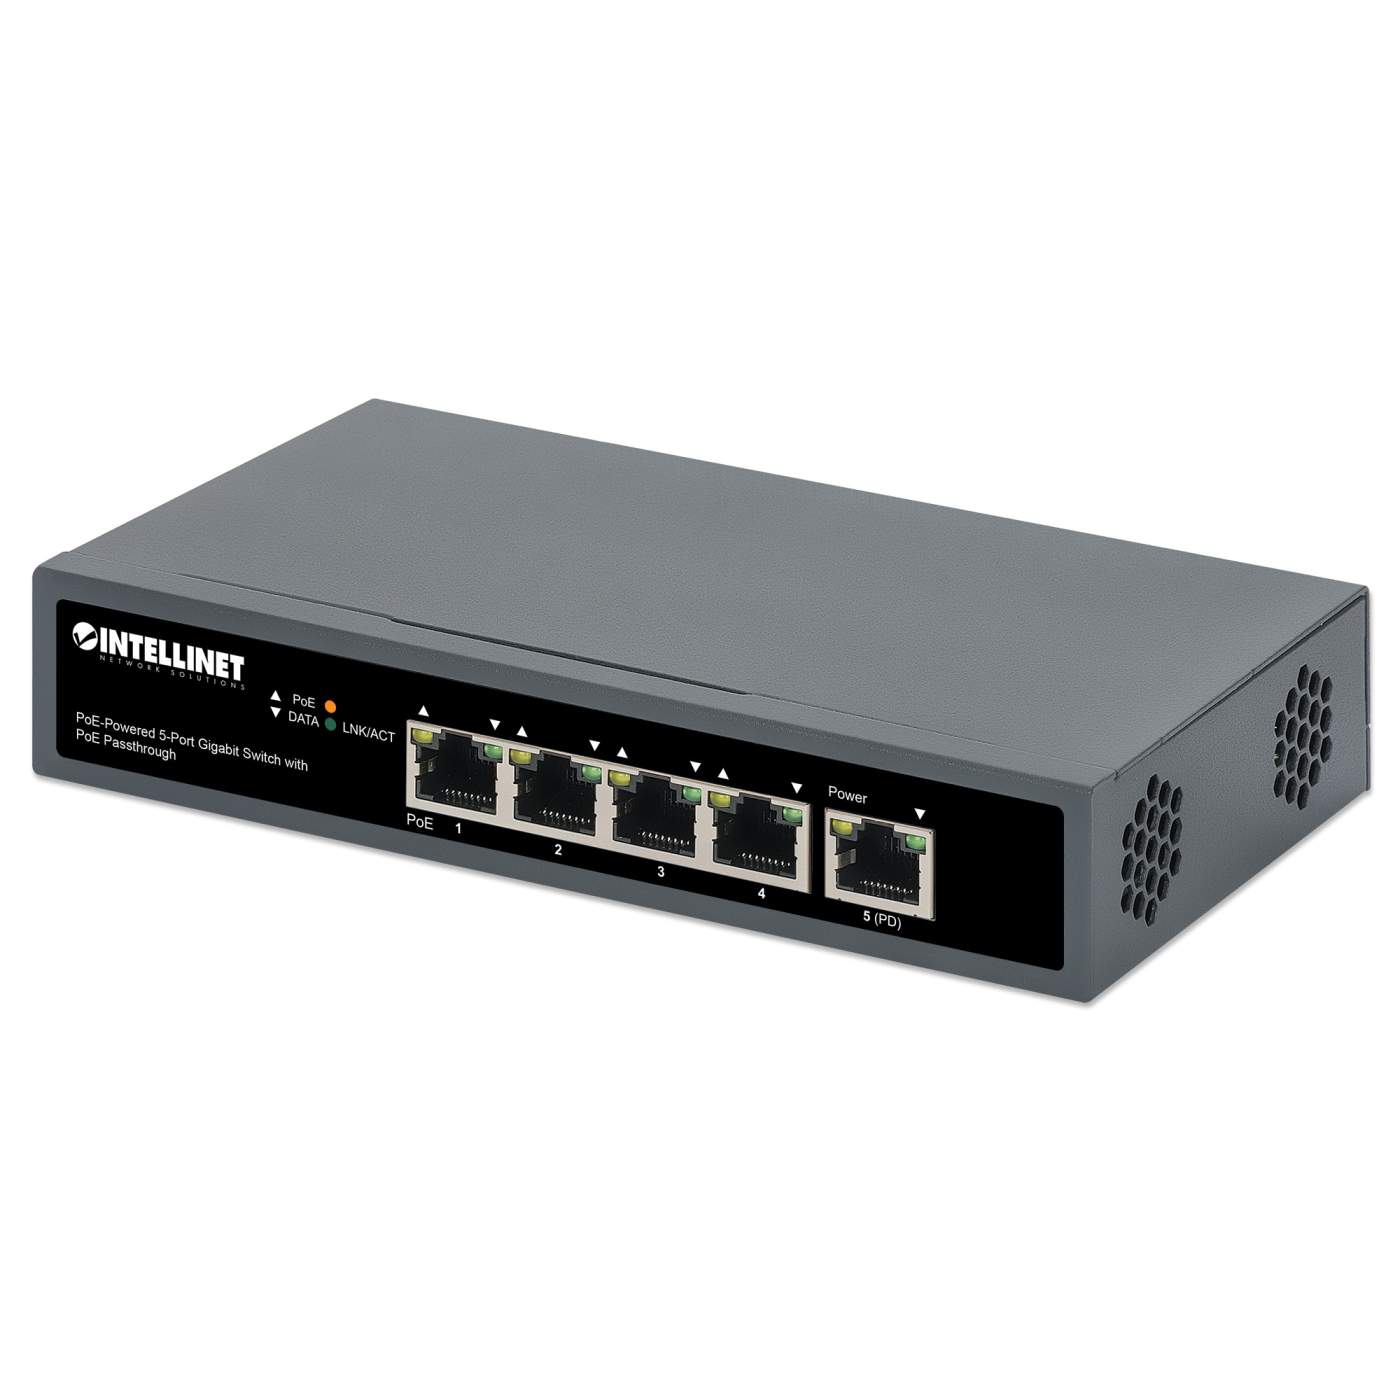 PoE-Powered 5-Port Gigabit Switch with PoE Passthrough Image 1